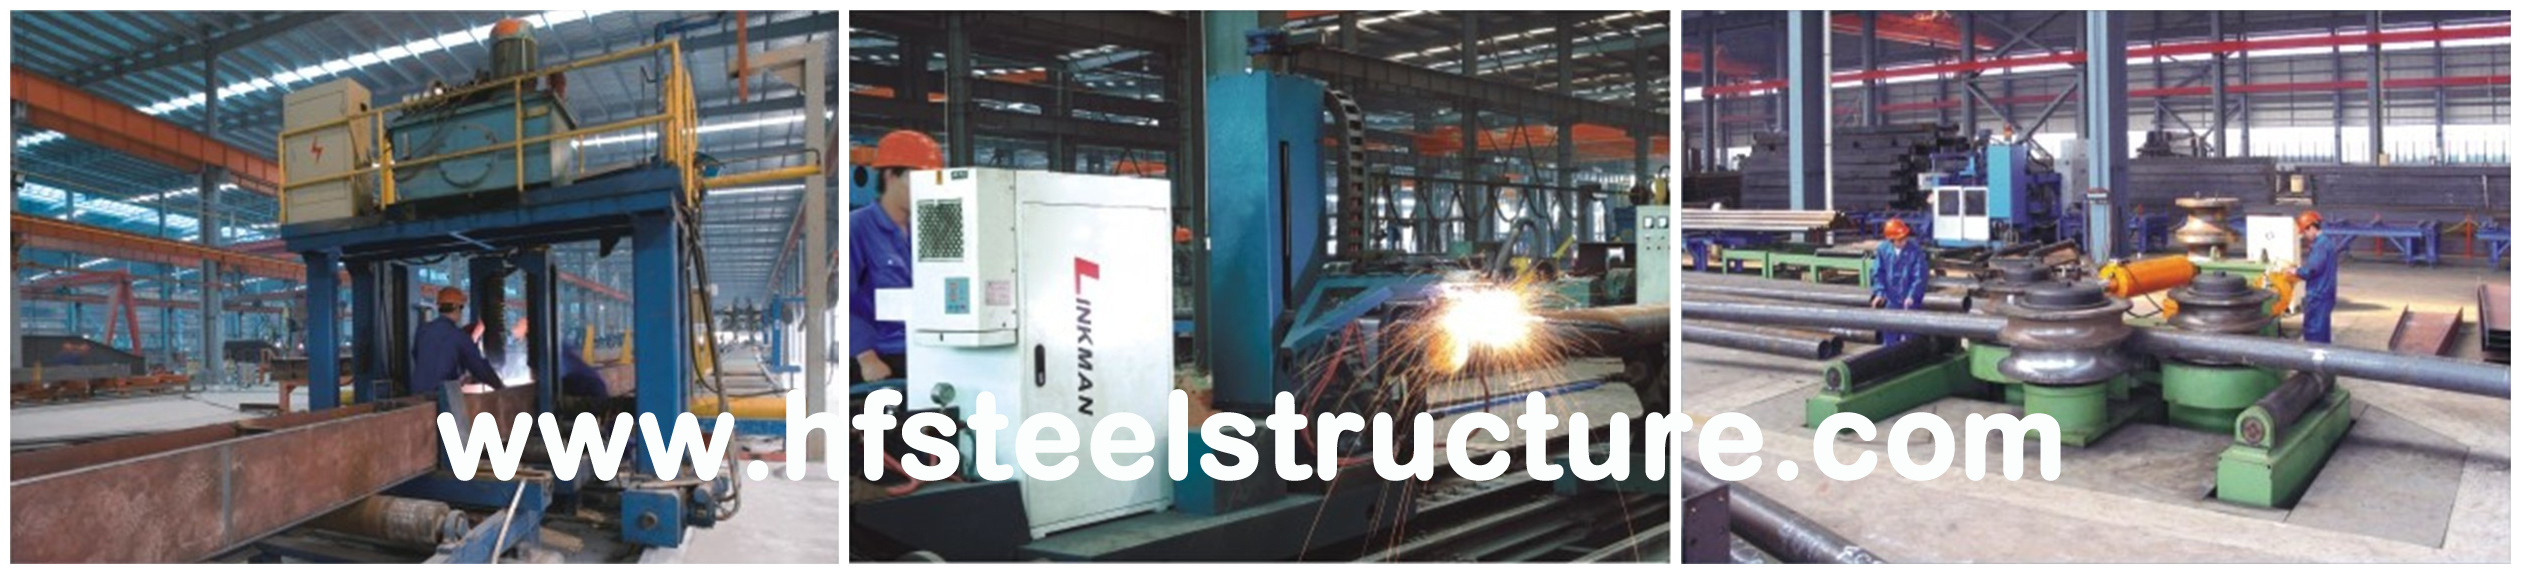 Prefabricated Light  Structural Steel Fabrications